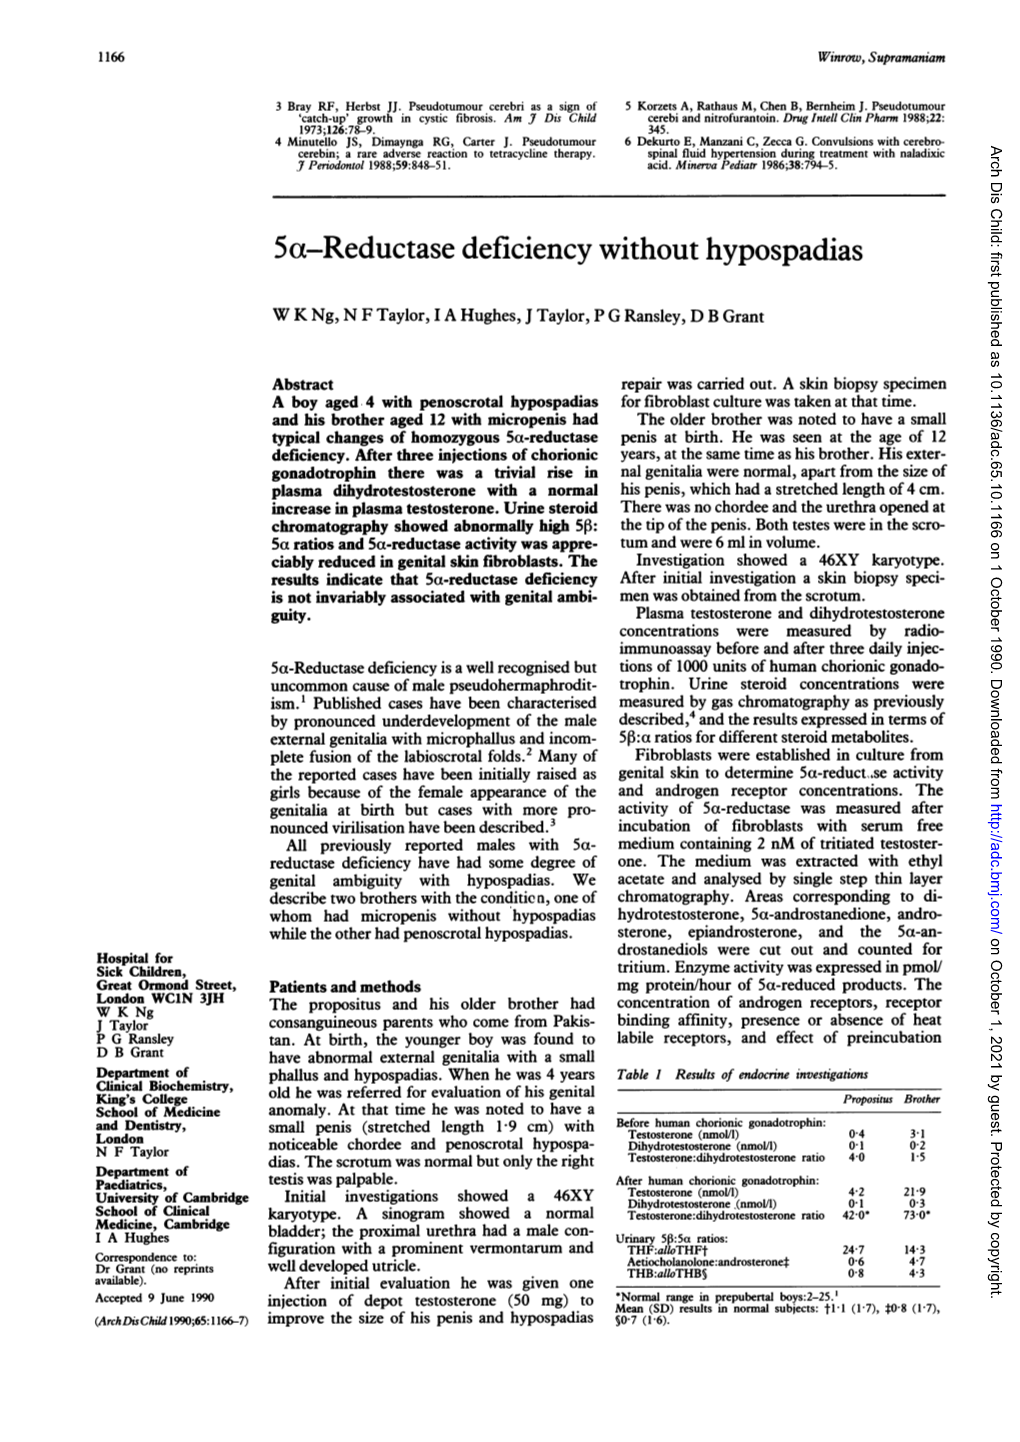 5A-Reductase Deficiency Without Hypospadias